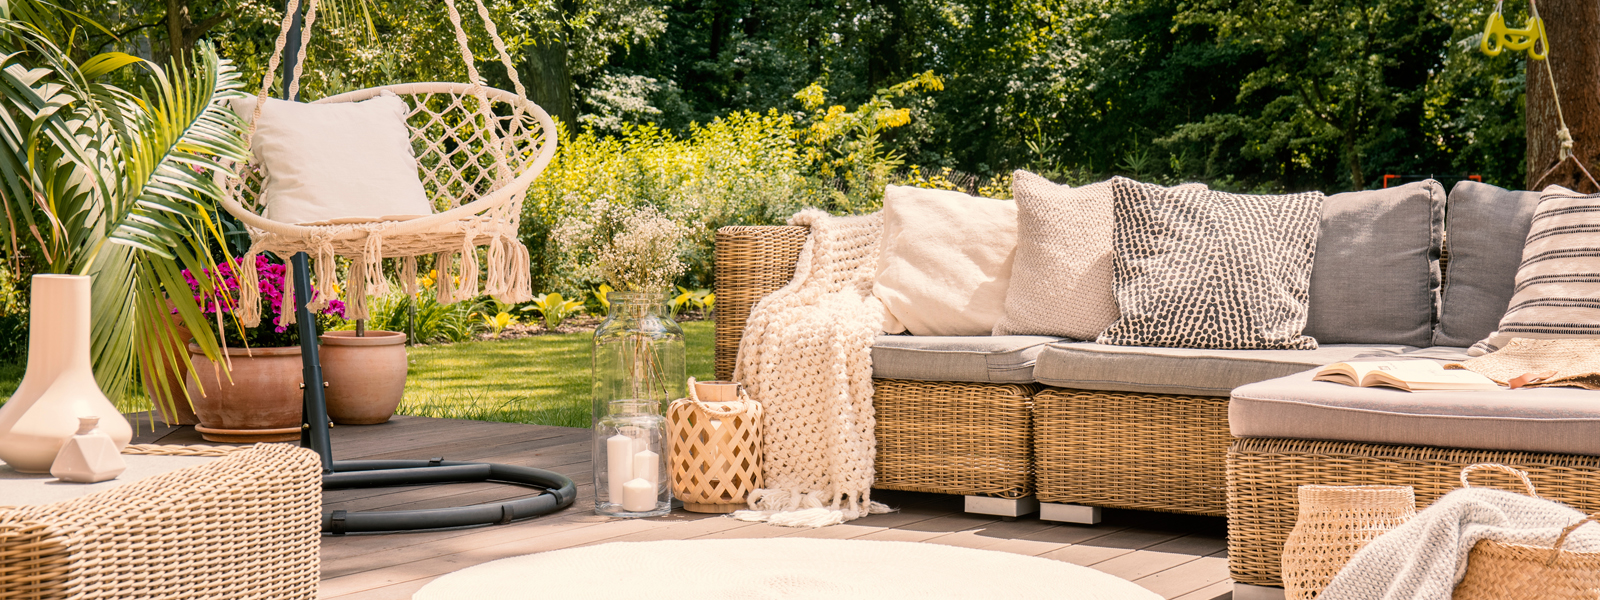 Outdoor and decorative cushions